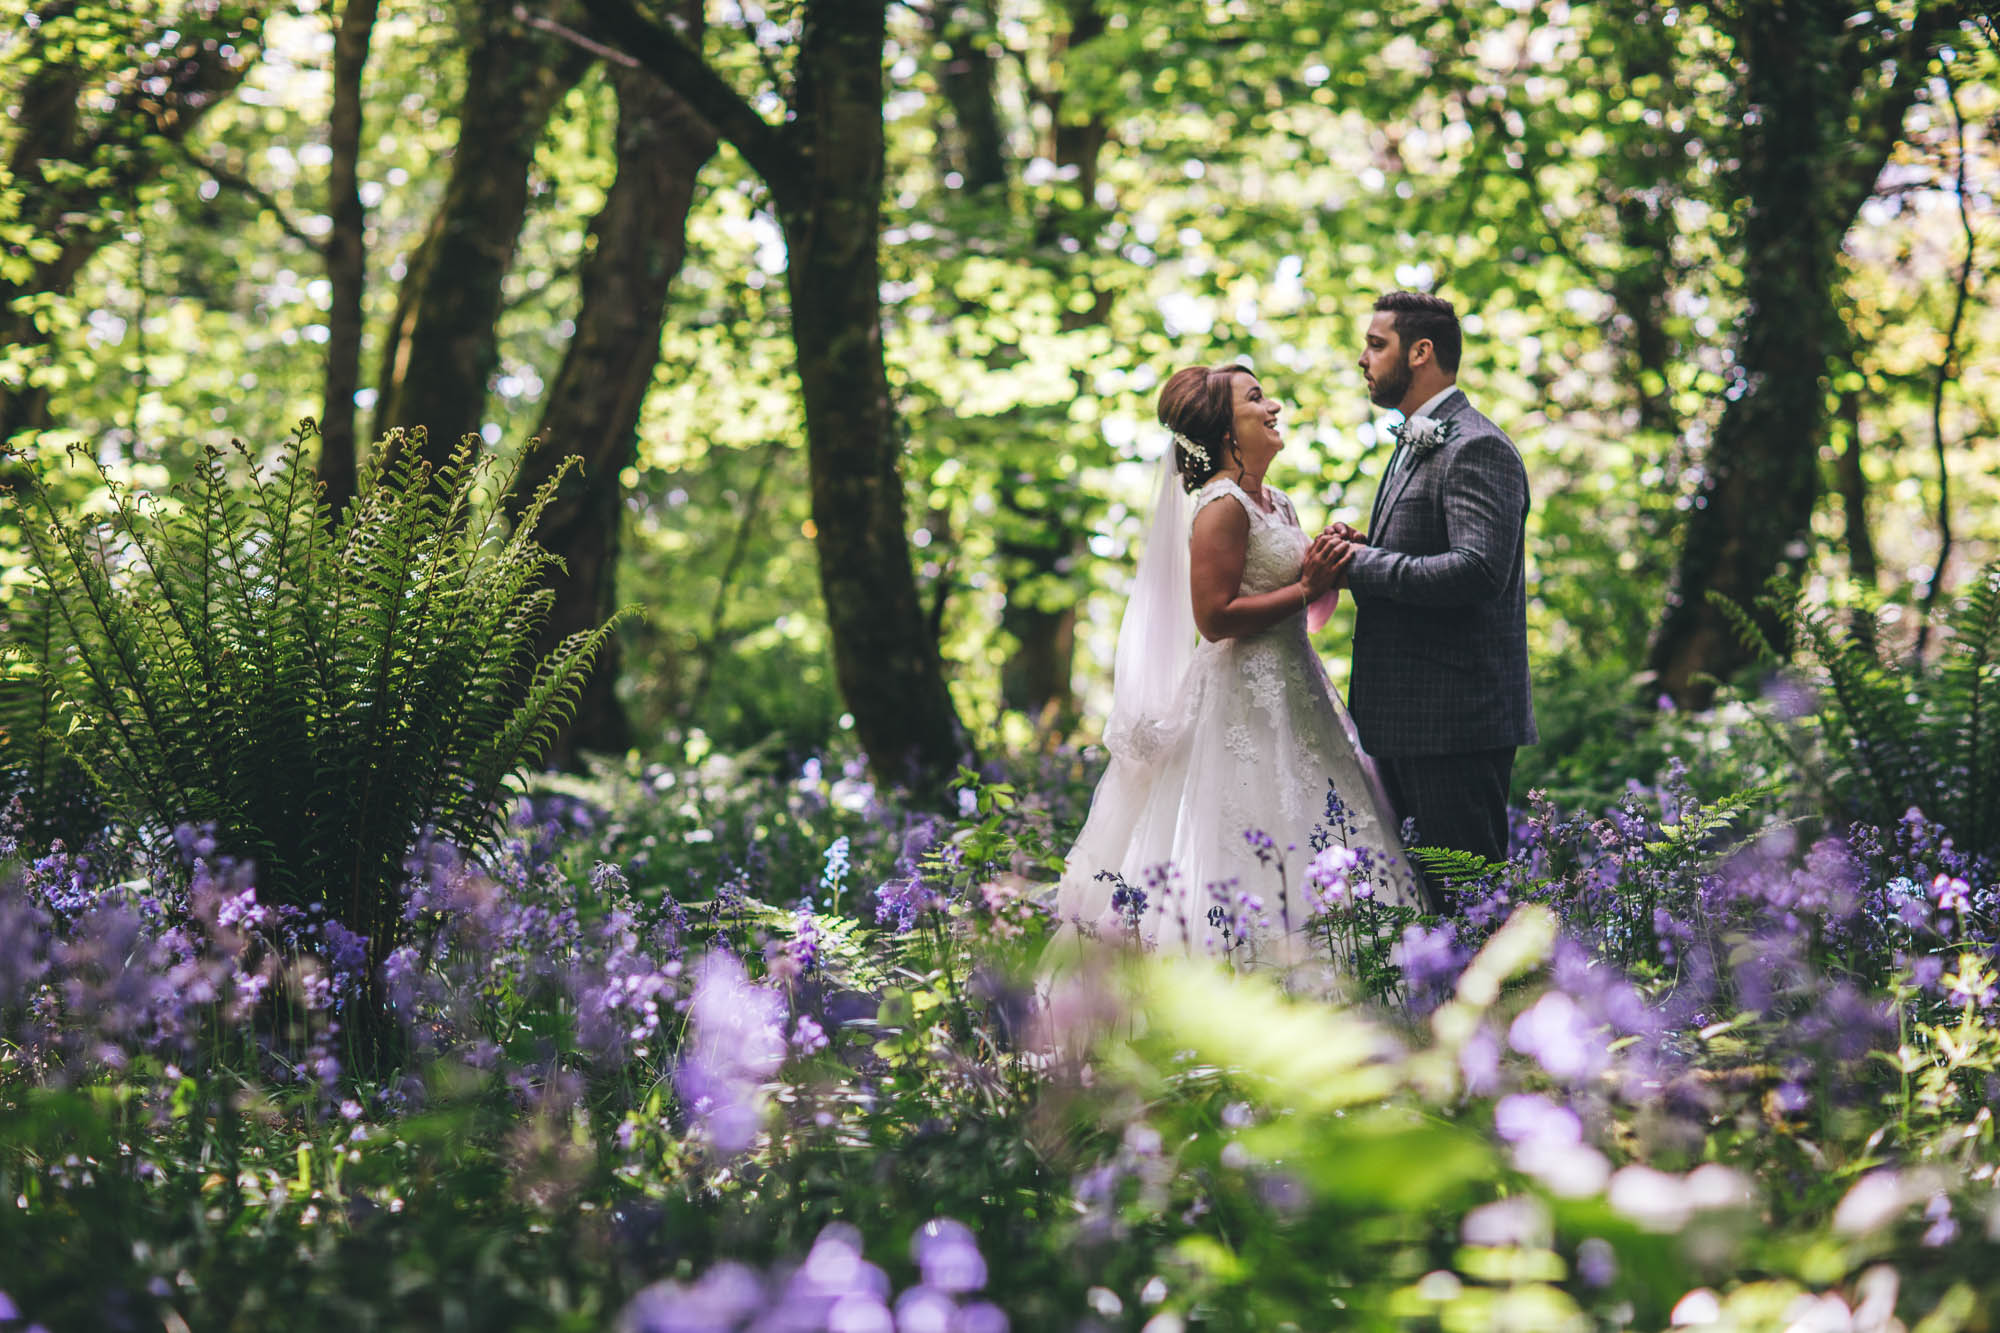 Groom making Bride laugh whilst they hold hands surrounded by greenery and purple flowers